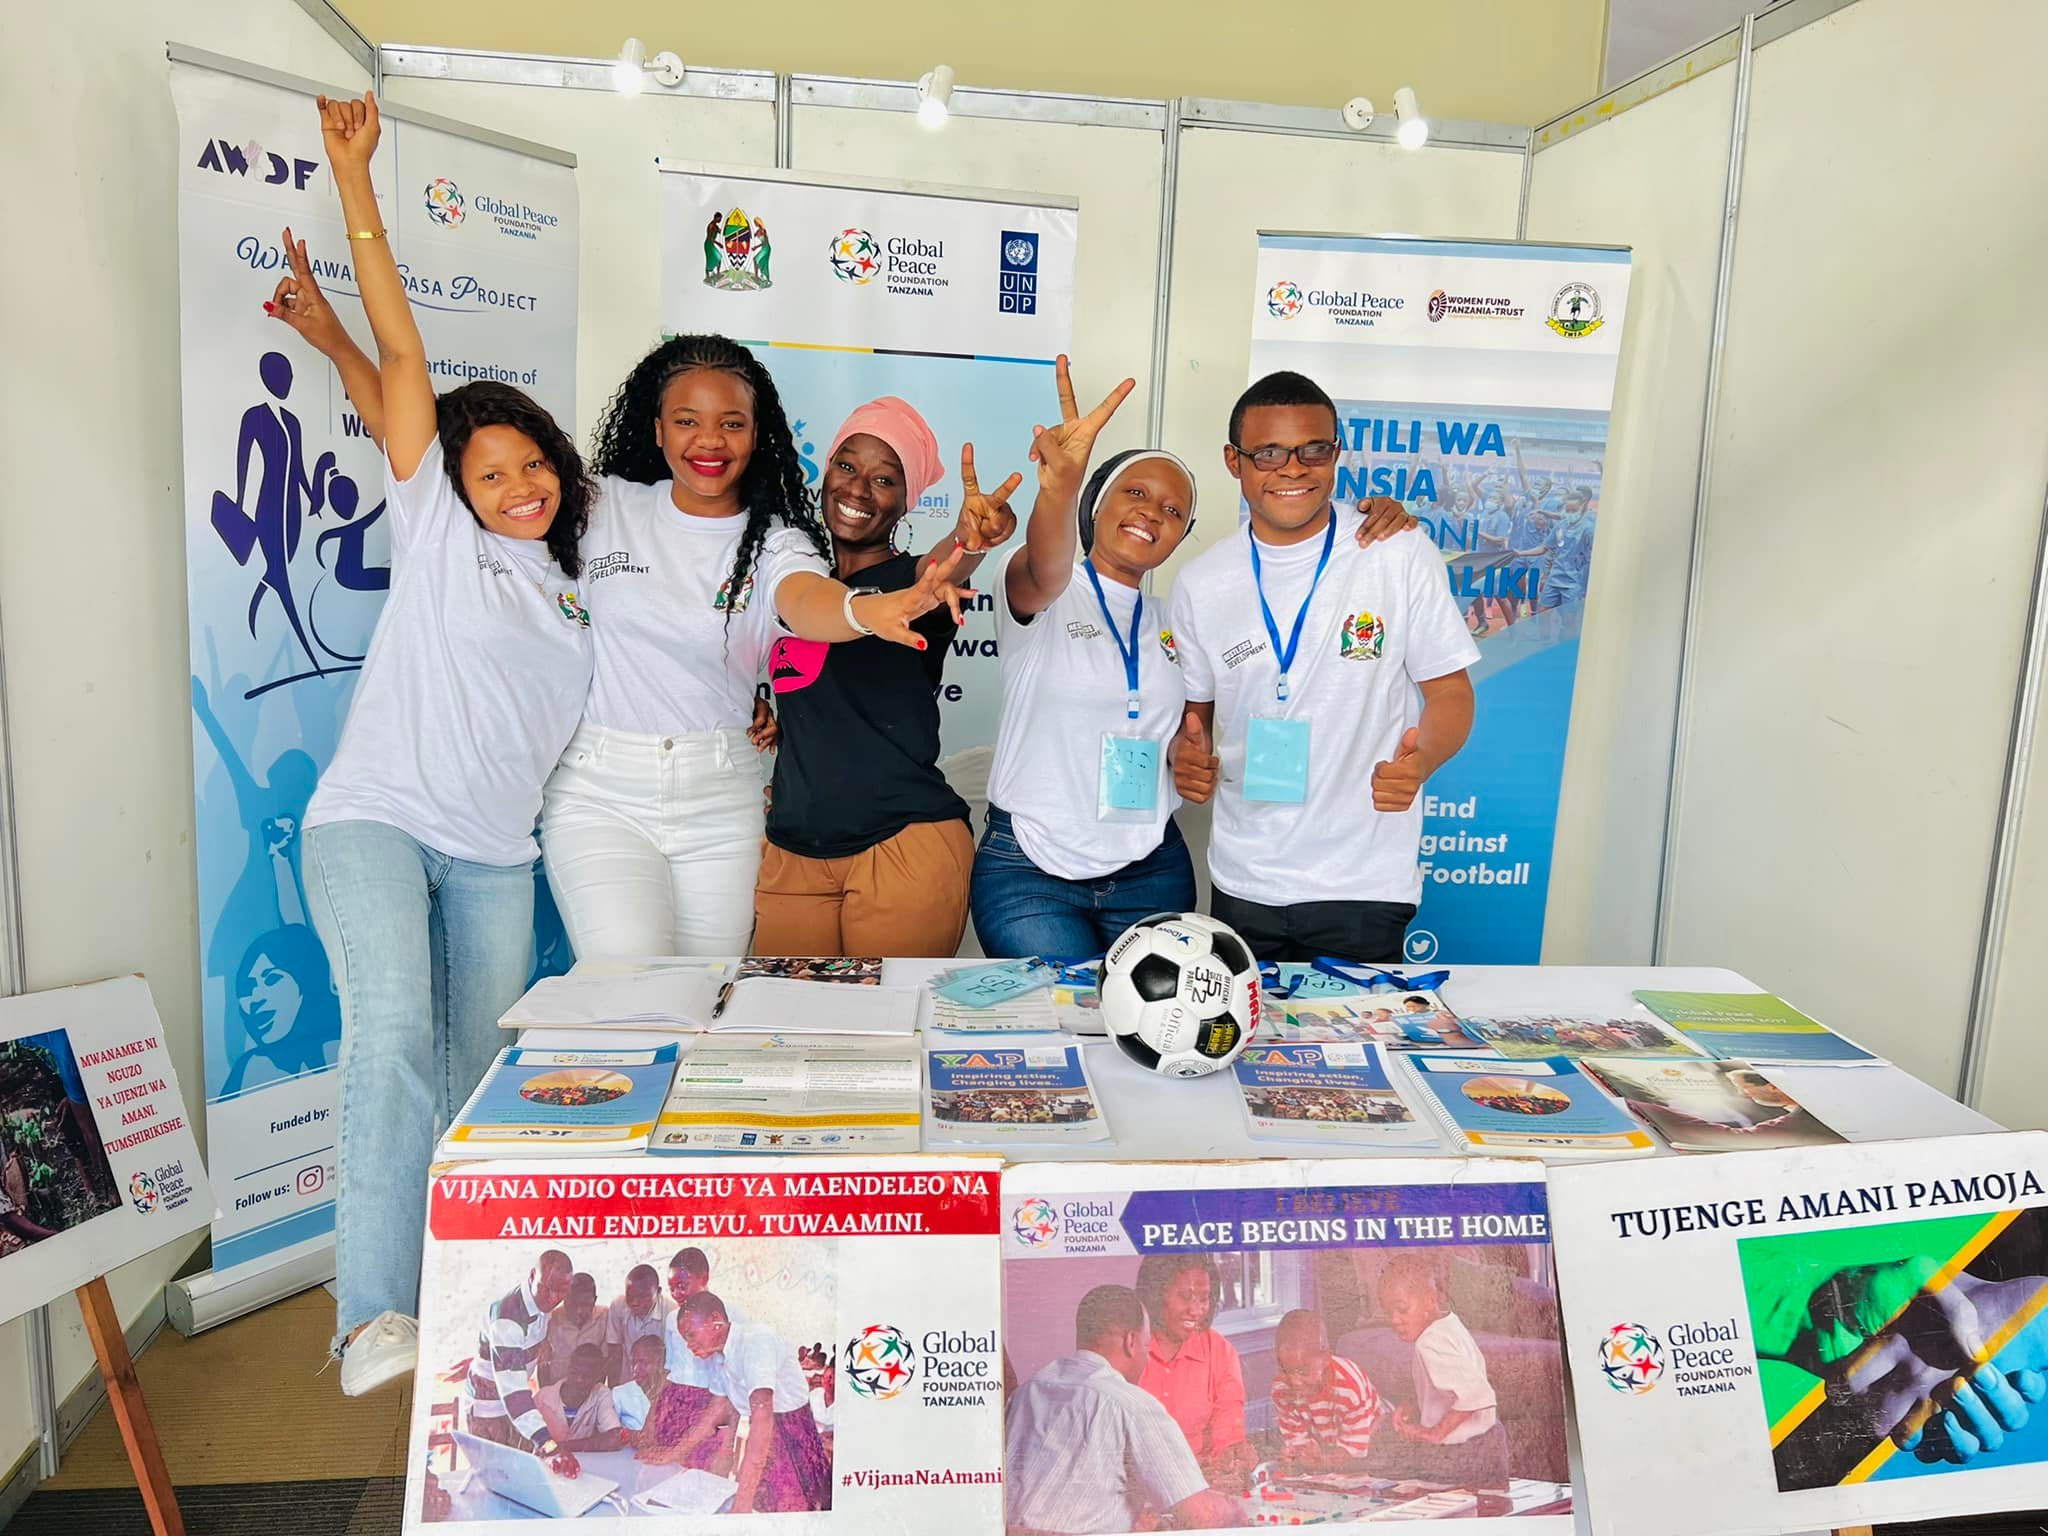 Global Peace Foundation | Peacebuilding Workshops Encourage Young Leaders in Tanzania